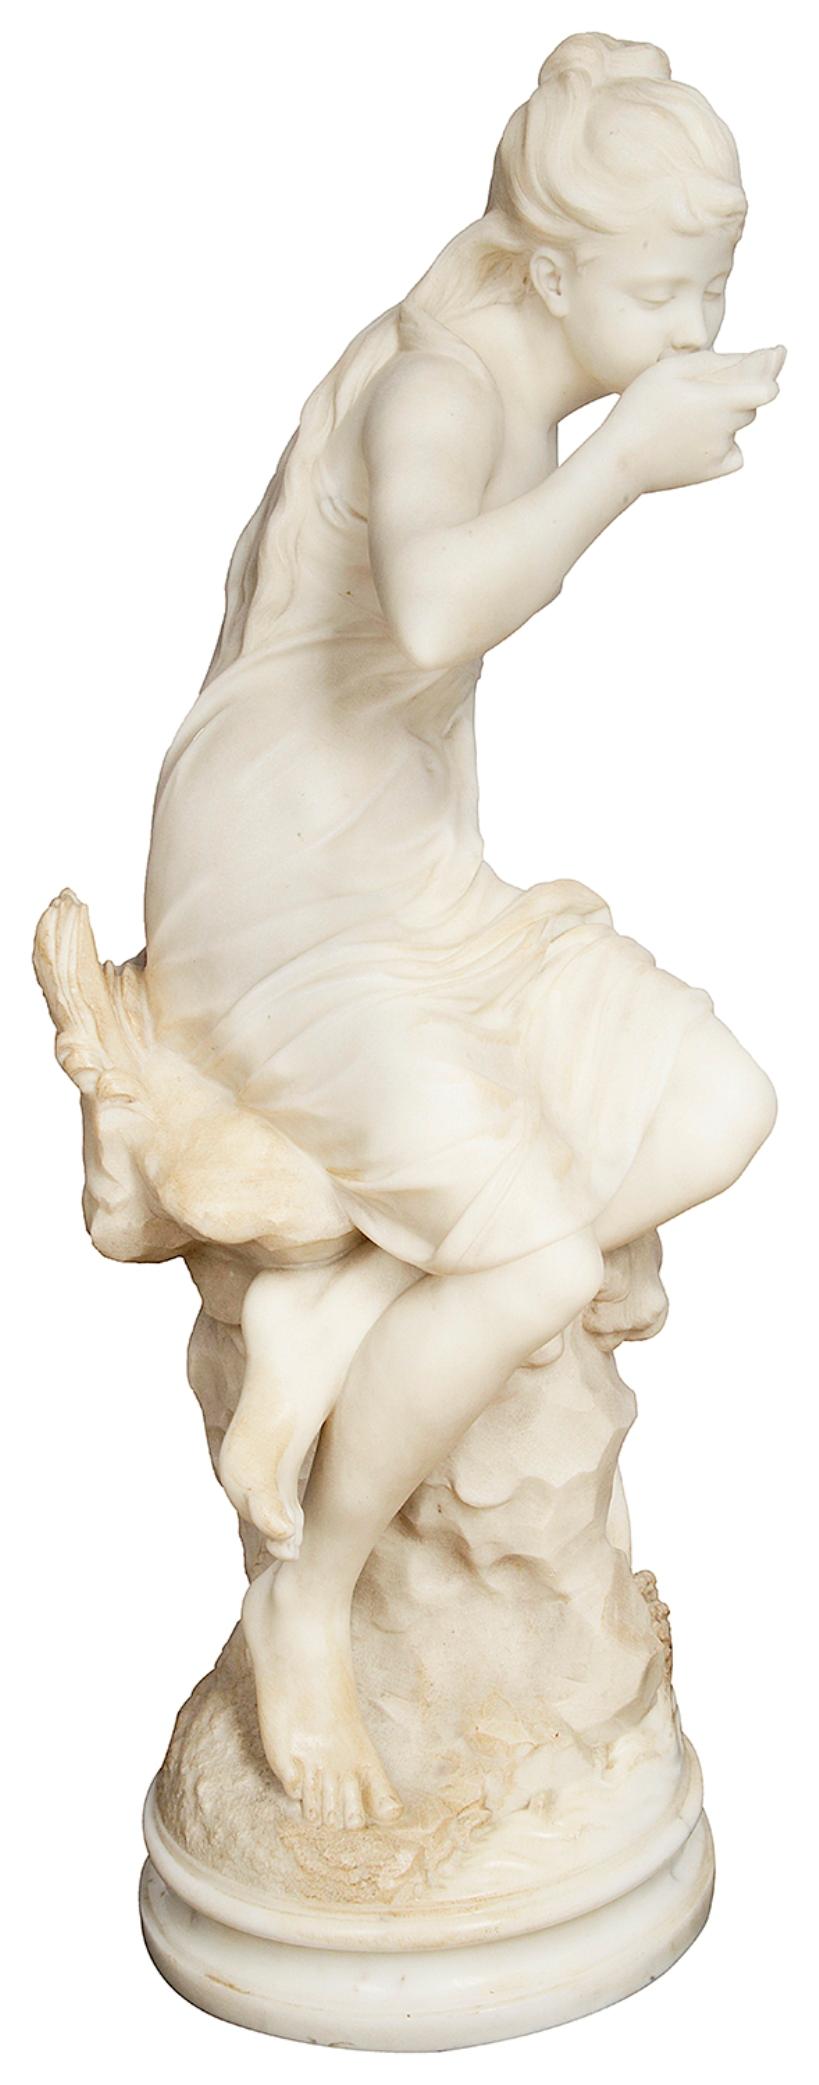 A fine quality 19th century Italian marble statue of an enchanting young girl sitting on a rock drinking water.
Signed; Orazio Andreoni
Orazio Andreoni was an Italian 19th sculptor and professor based in Rome whose works in marble were of subjects